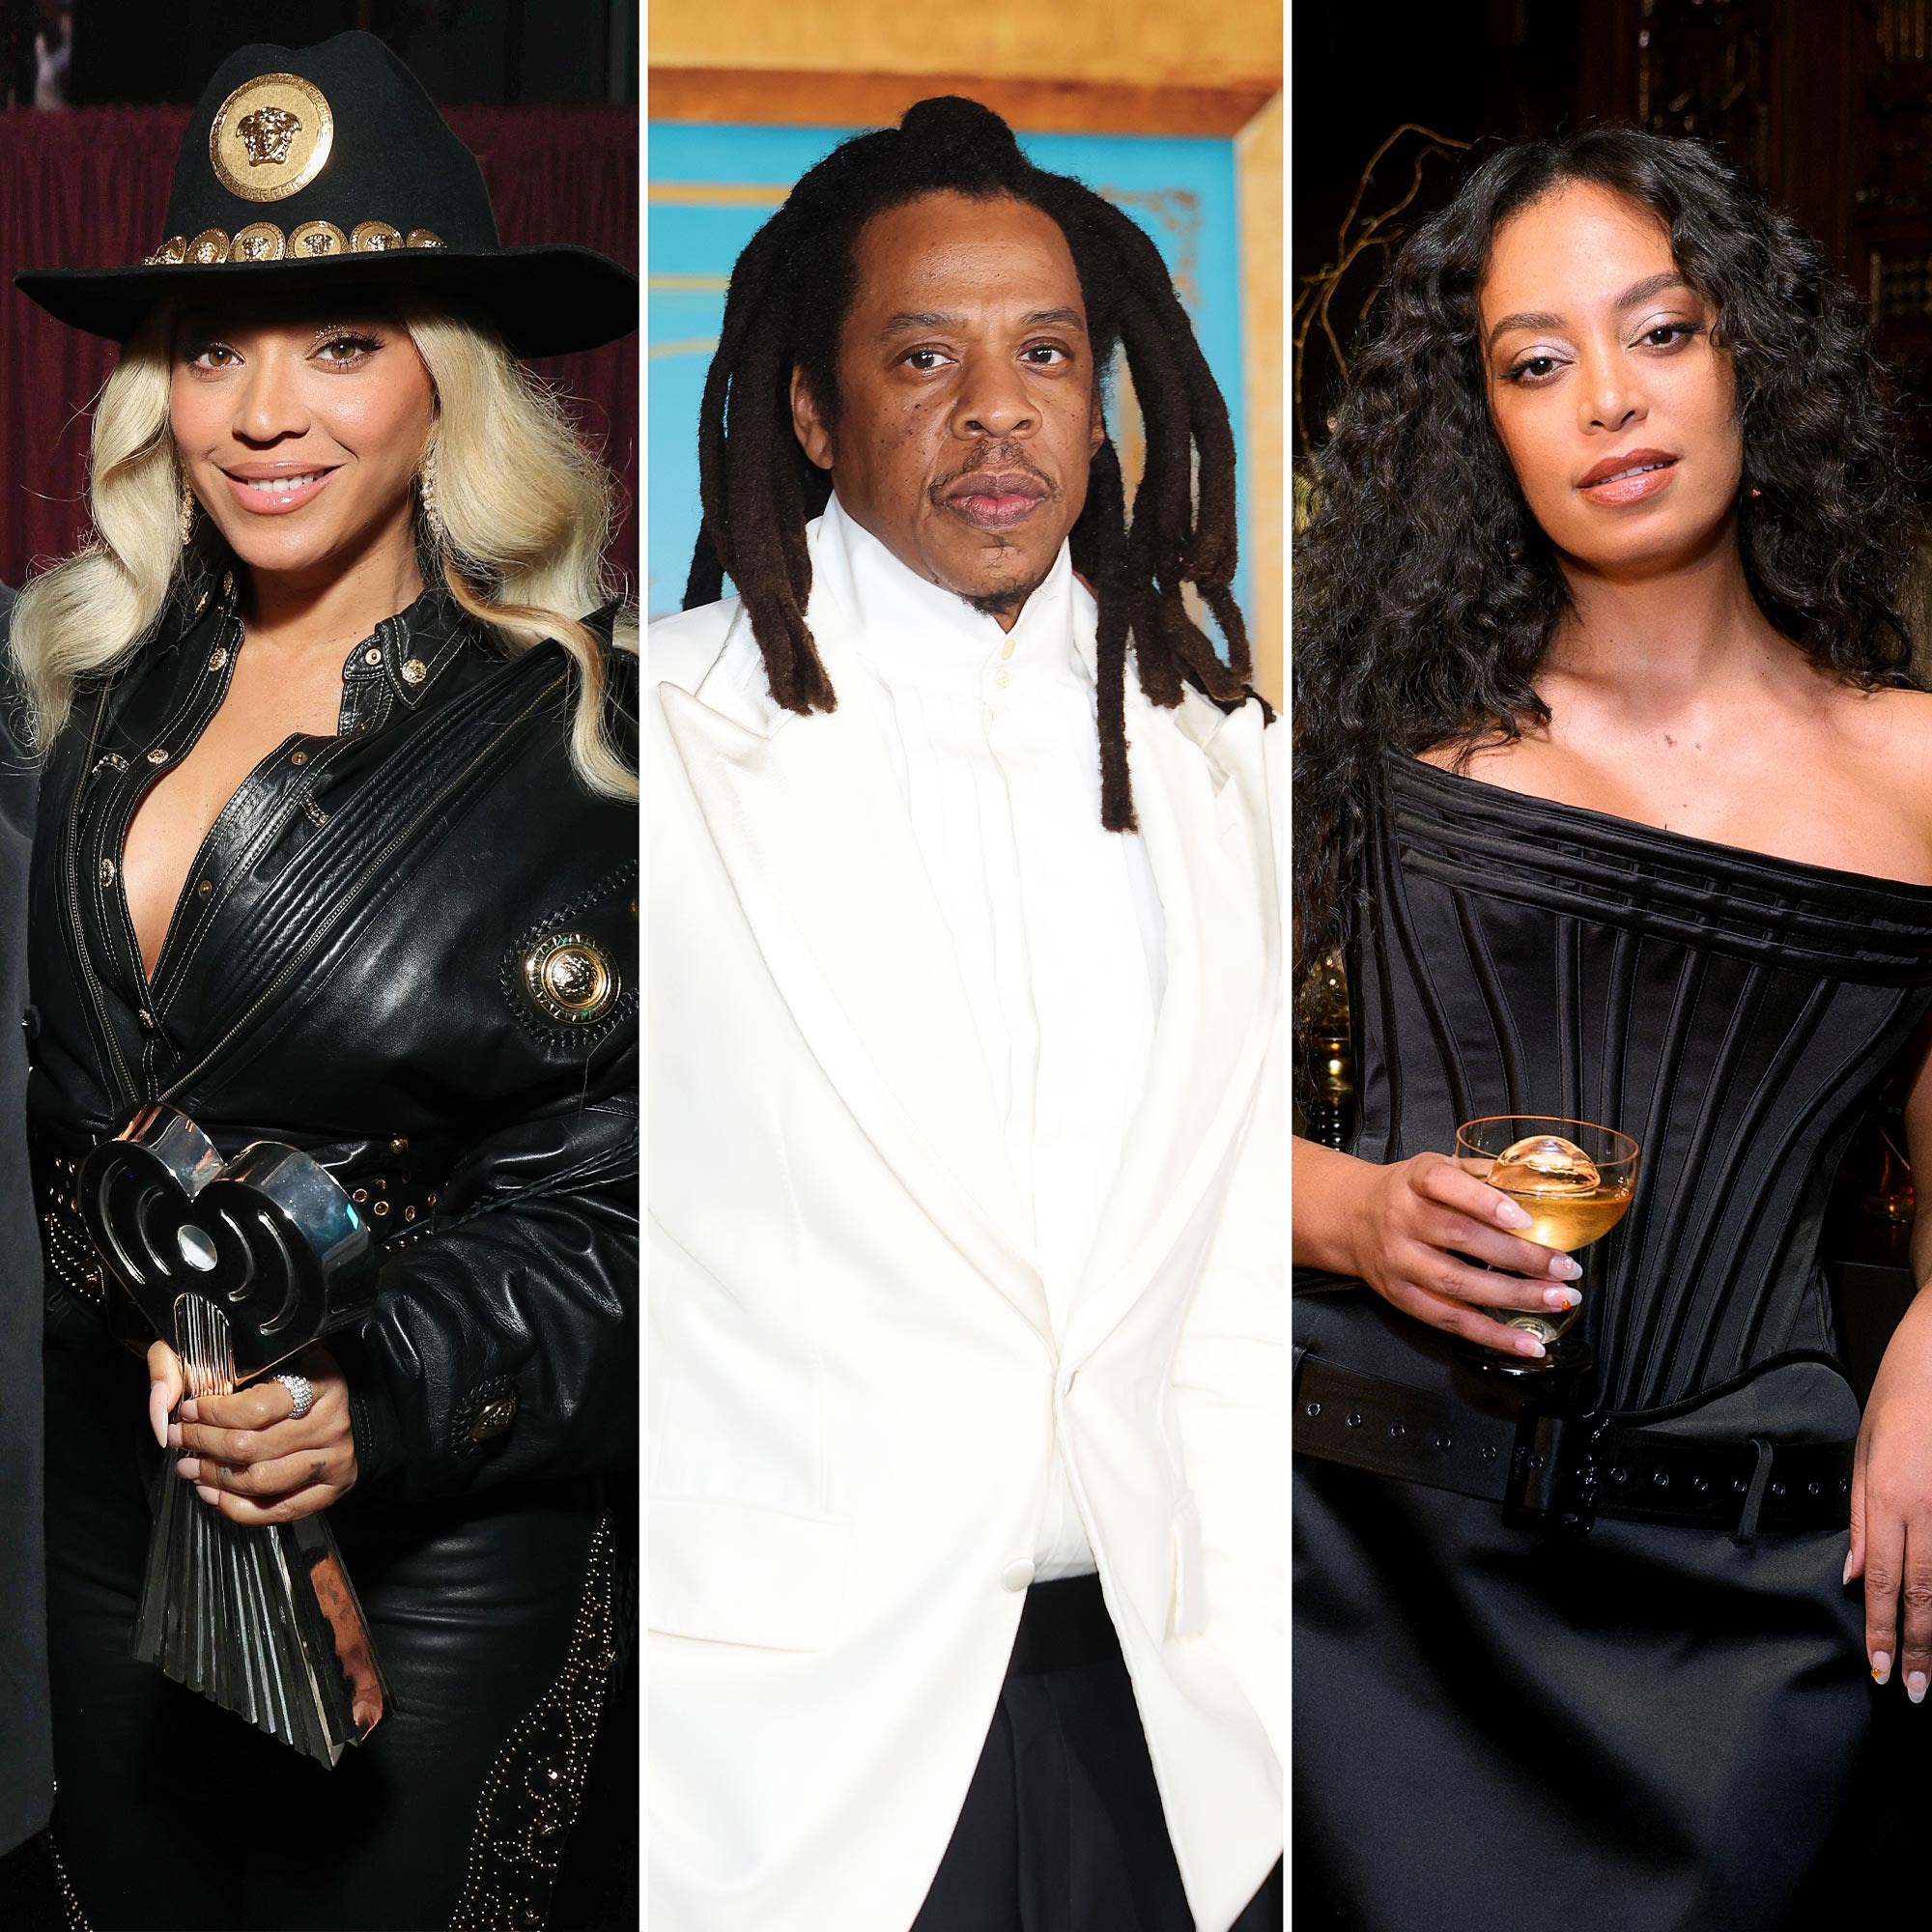 Relive Beyonce, Jay-Z and Solange Knowles’ Infamous Elevator Fight 10 Years Later